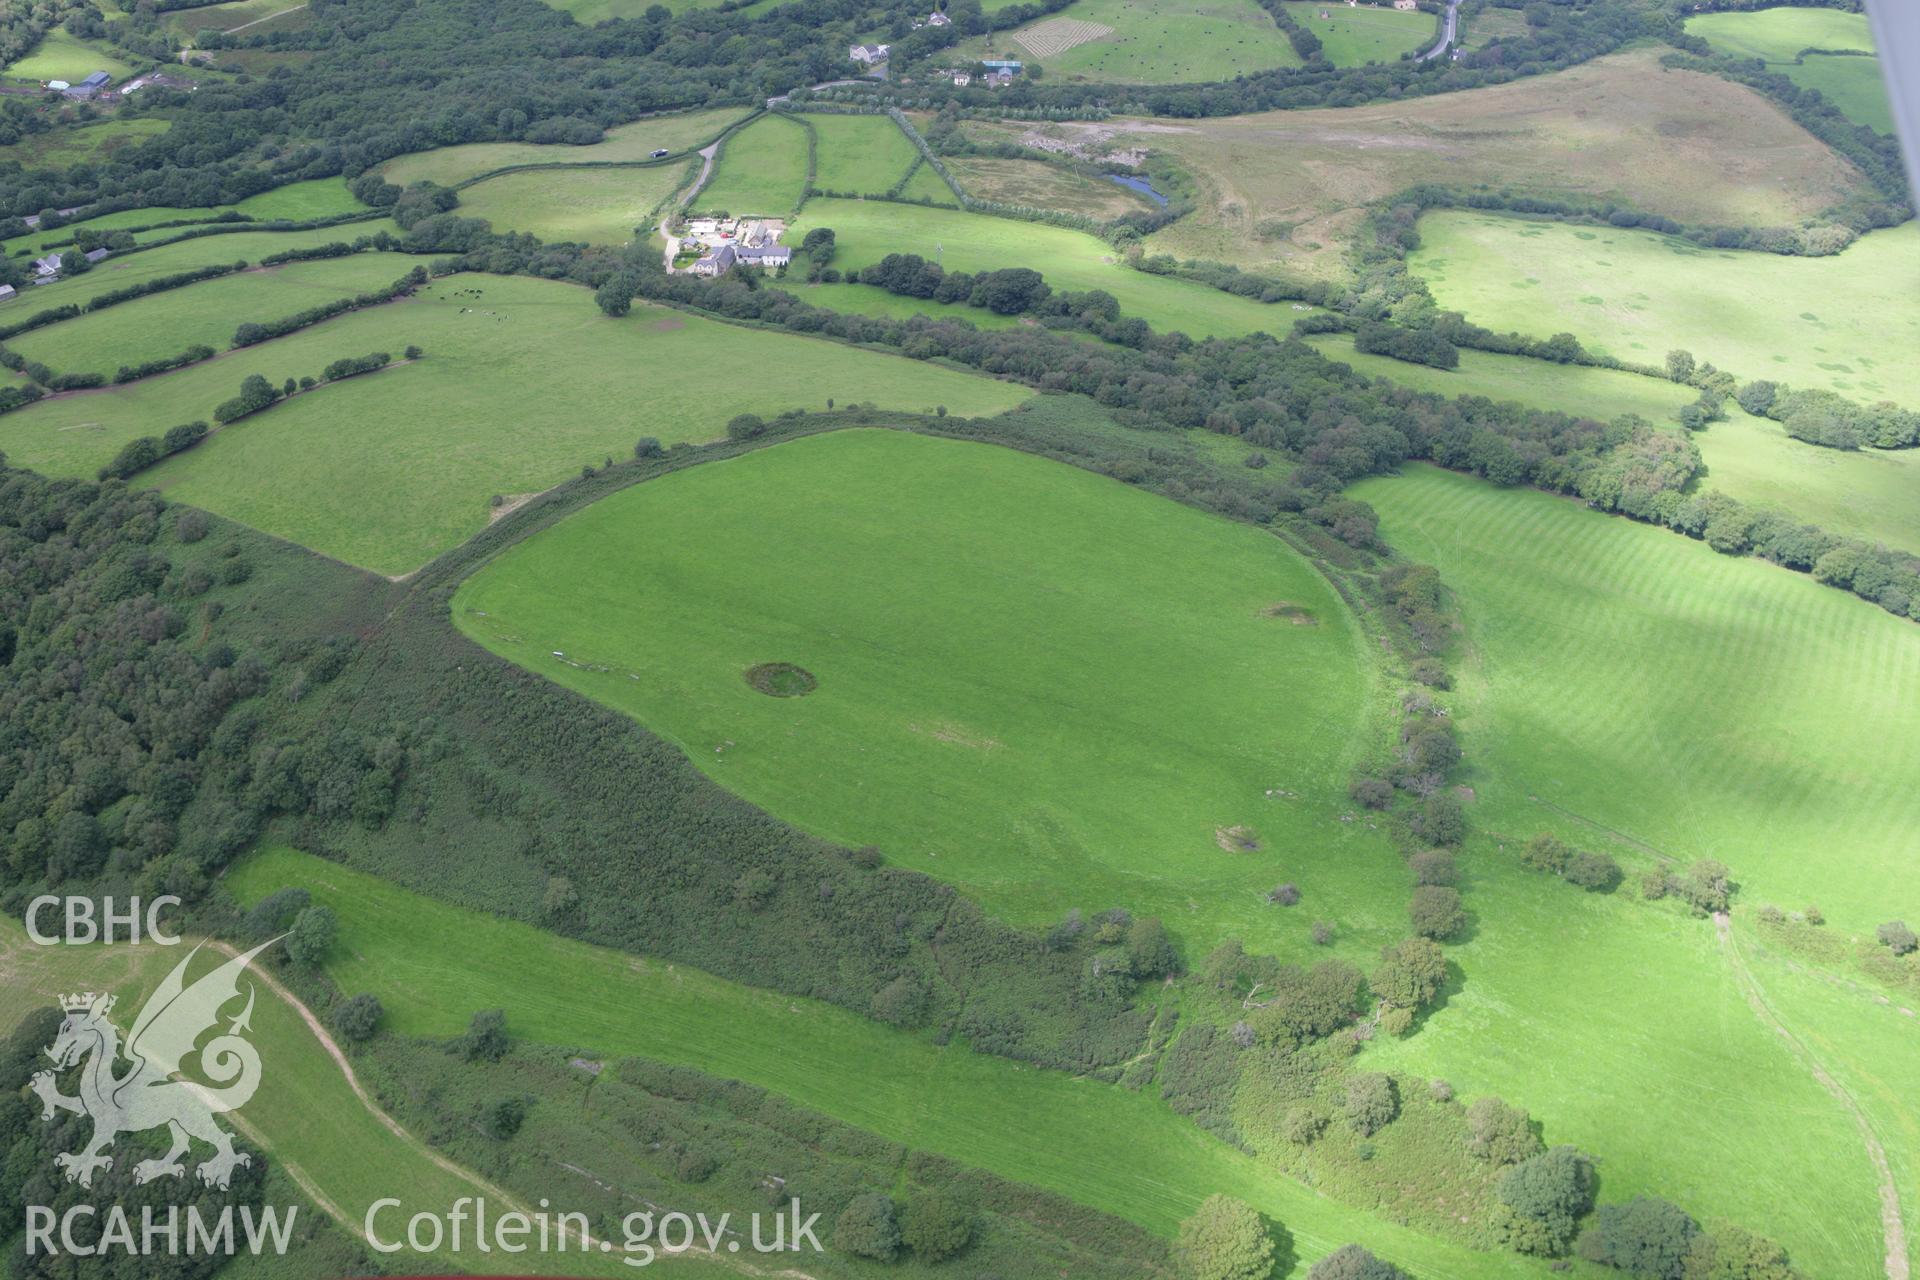 RCAHMW colour oblique aerial photograph of Caerau Hillfort, Rhiwsaeson, Llantrisant. Taken on 30 July 2007 by Toby Driver